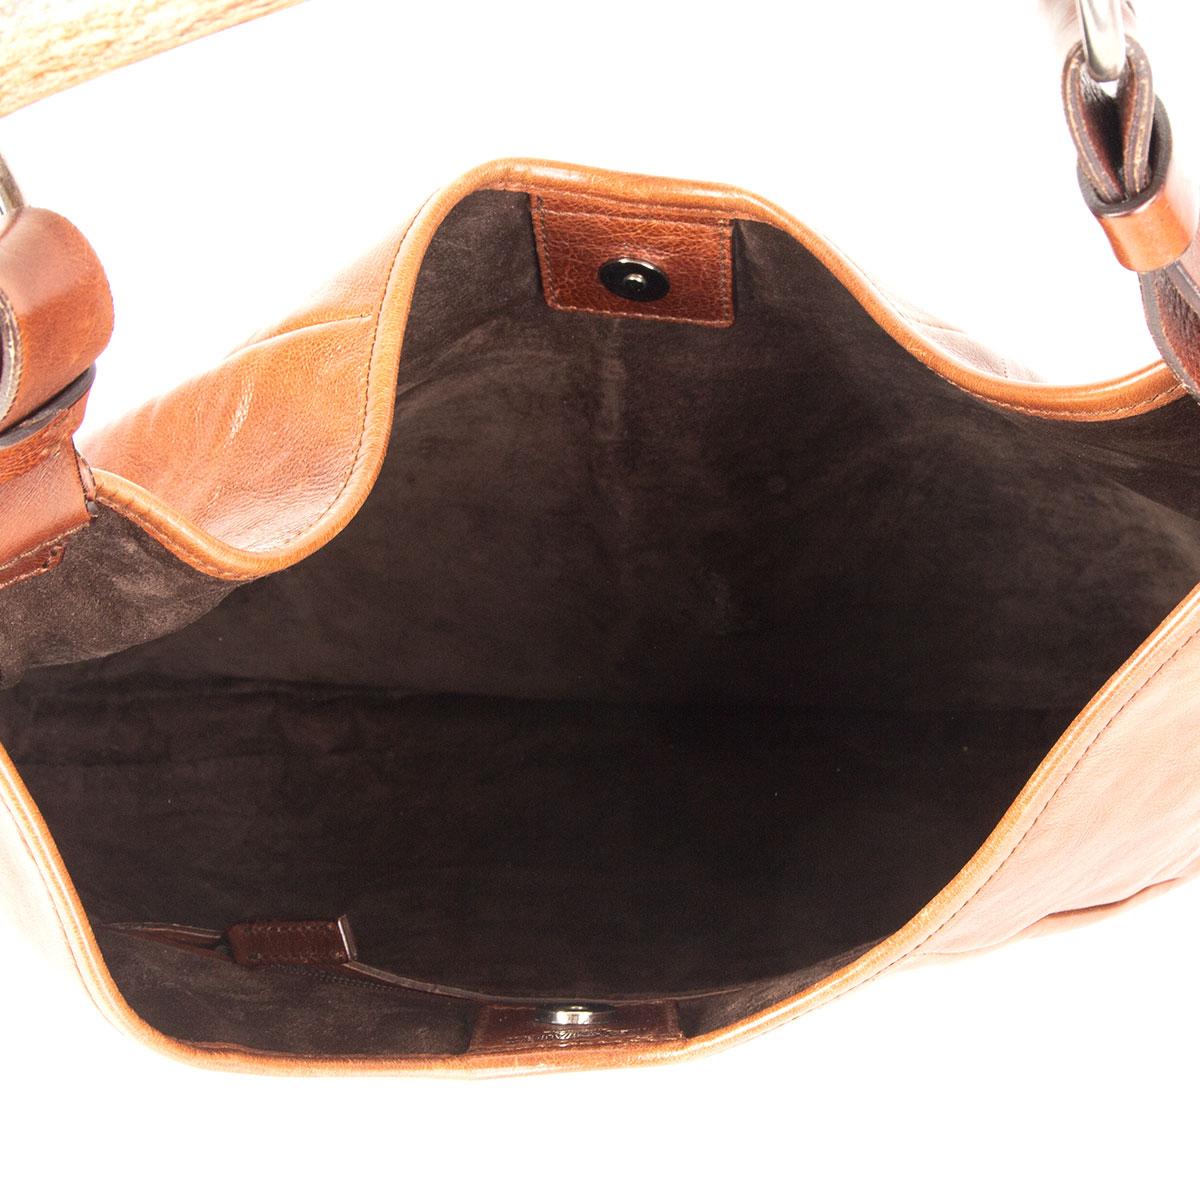 executive leather file bags in mombasa